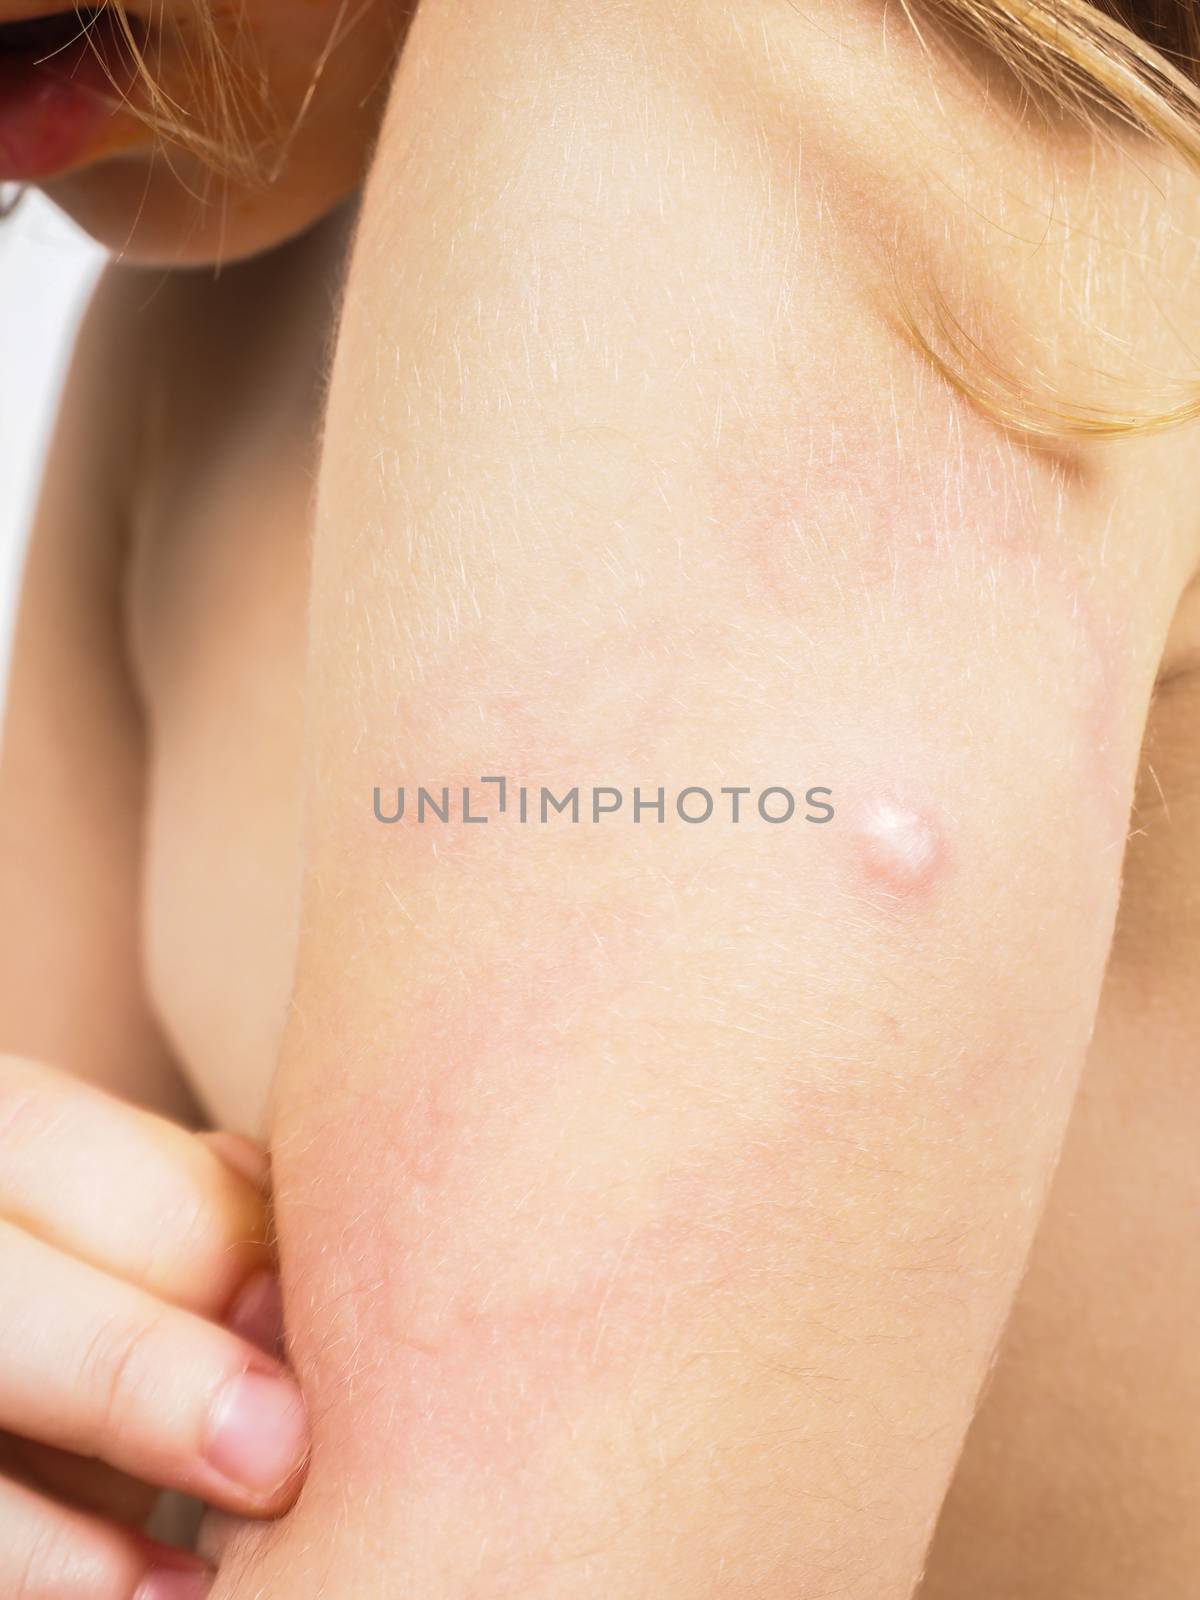 Child with hive, rash, or some skin abnormality on left arm by Arvebettum